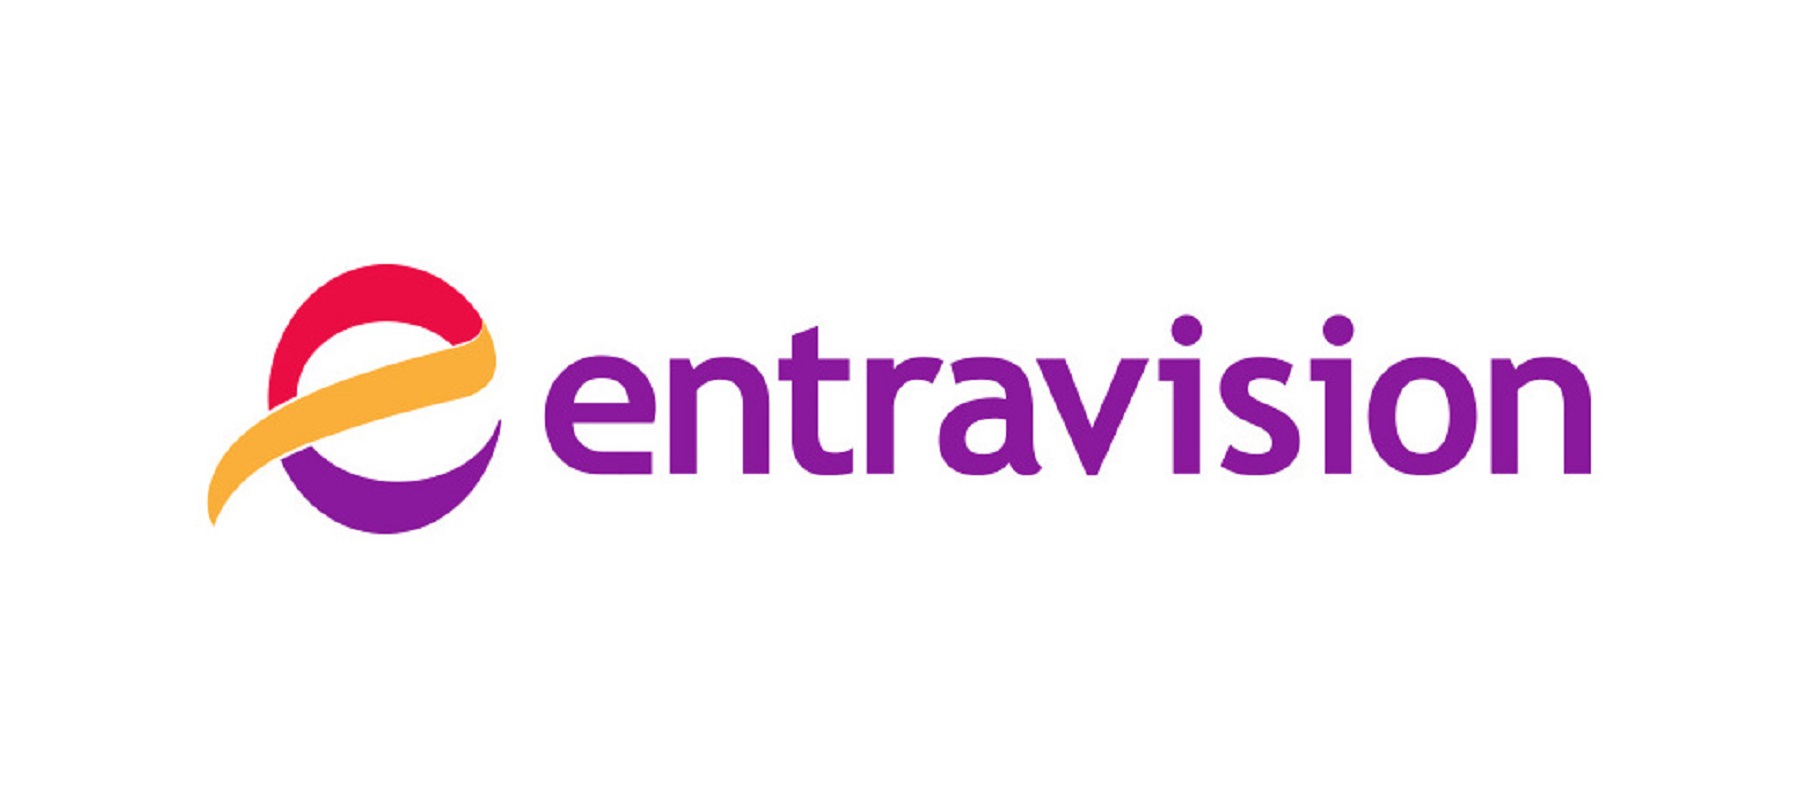 Entravision launches news facility in Las Vegas targeting Latino audience